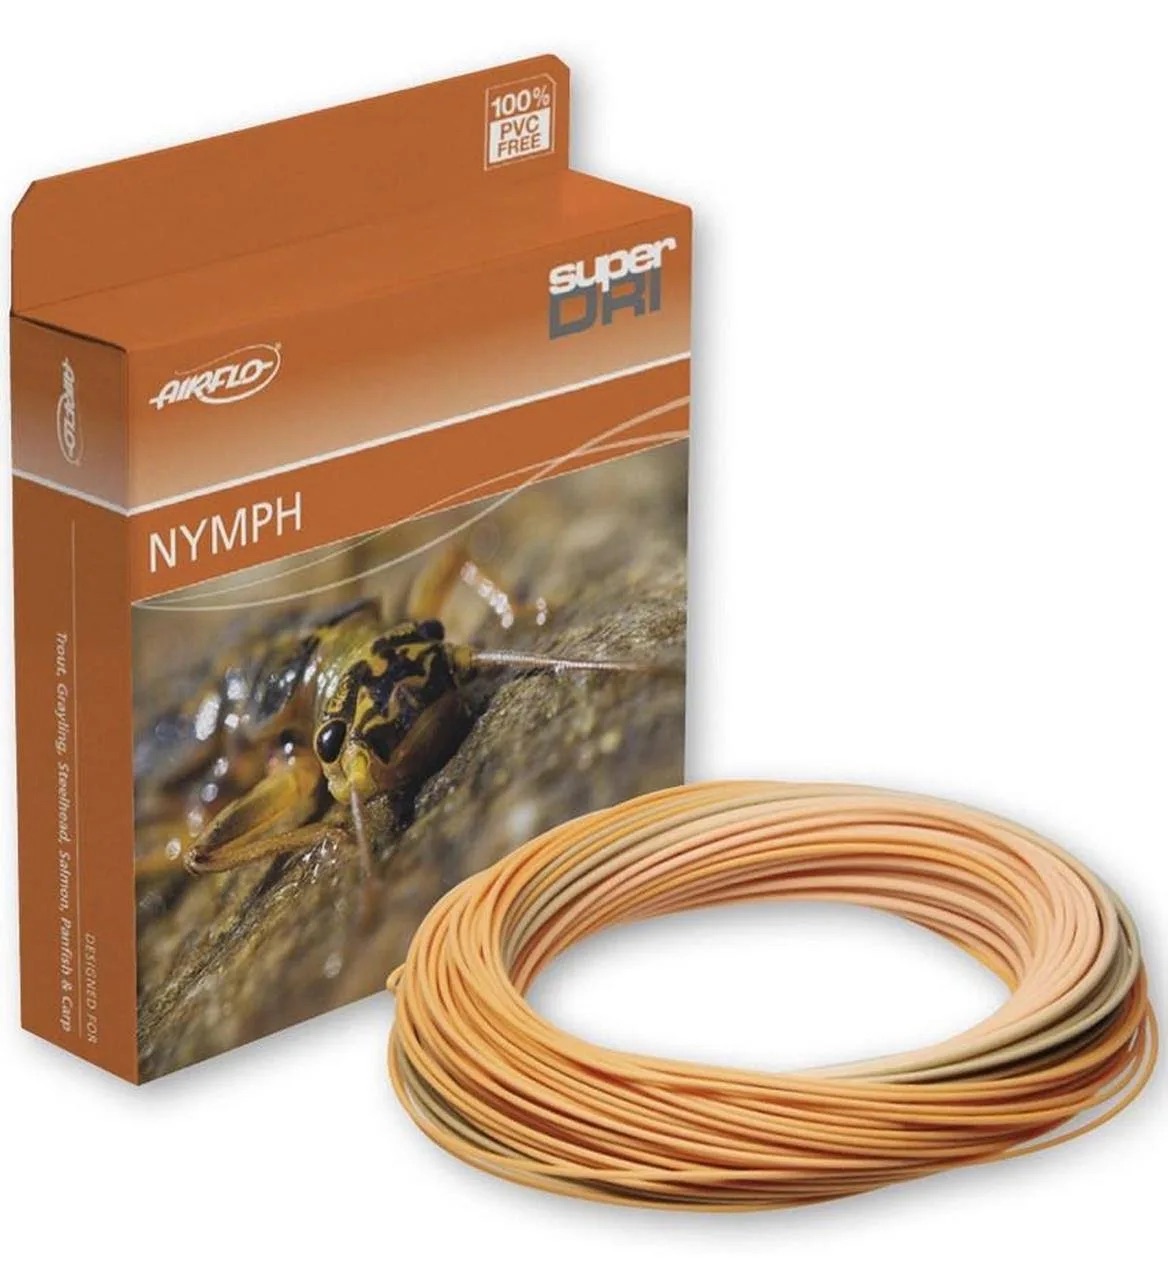 Airflo Superdri Galloup's Nymph Taper We have fly lines from